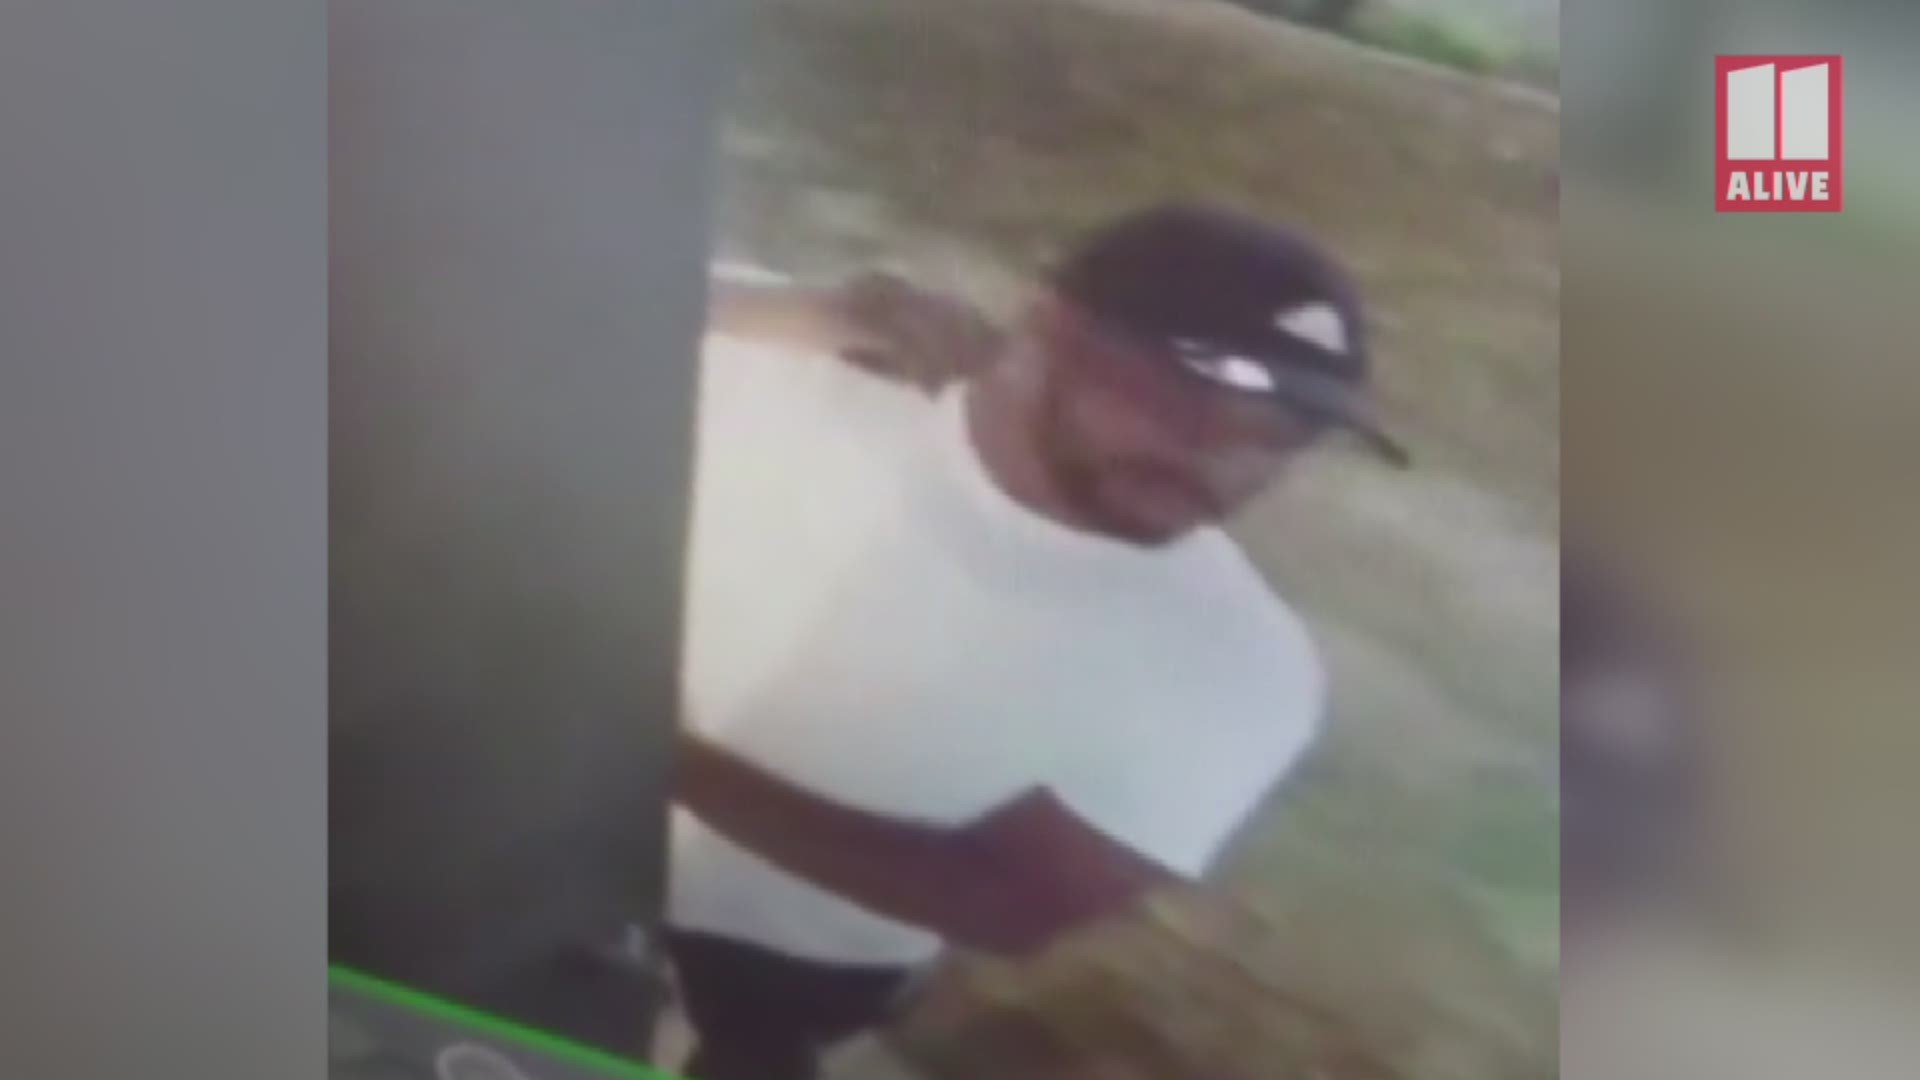 Police are hoping someone will recognize him and call Crime Stoppers Atlanta at 404-577-8477.